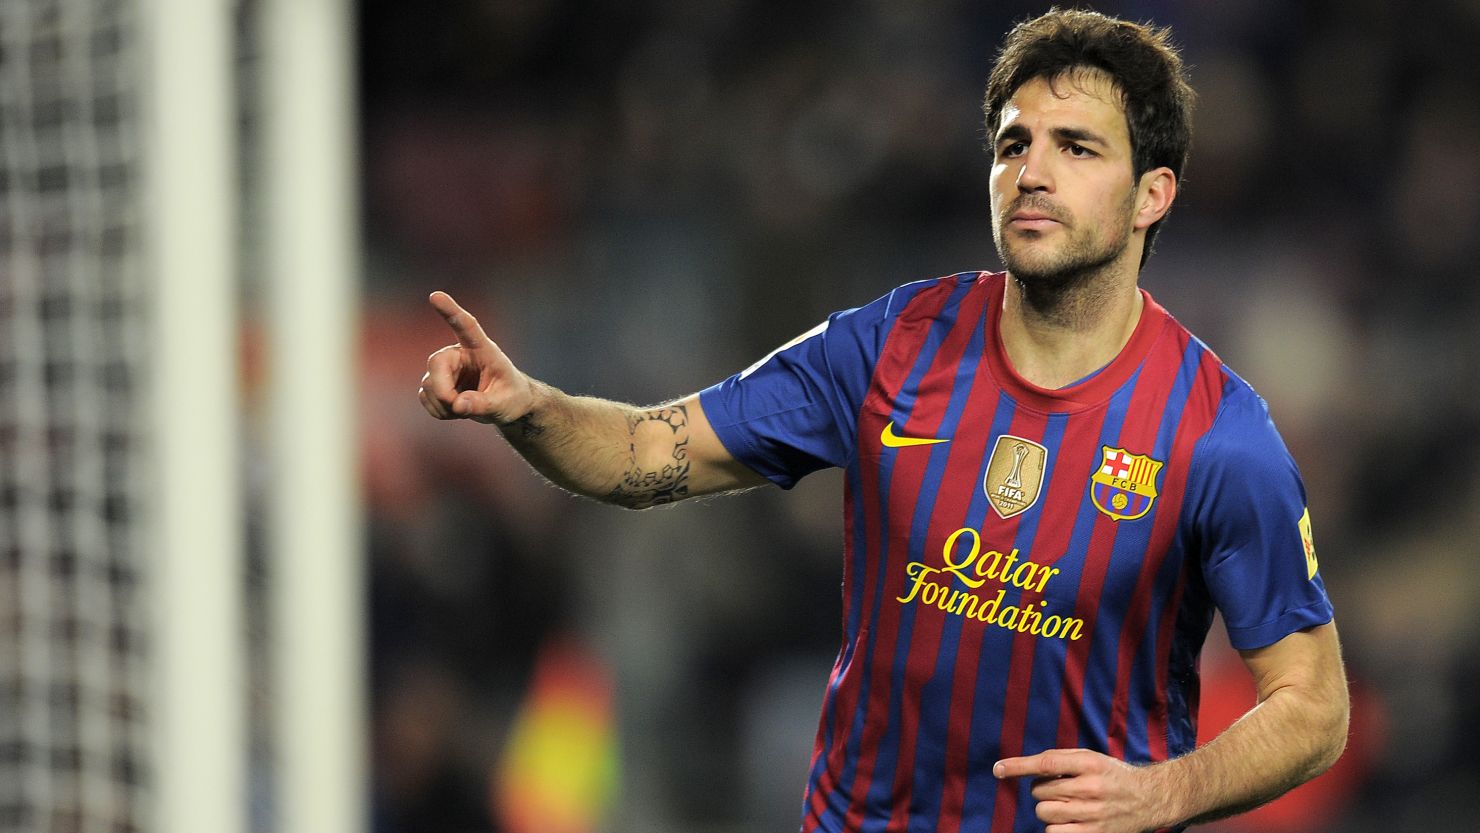 Cesc Fabregas opened the scoring for Barcelona in their 2-0 victory over Valencia.